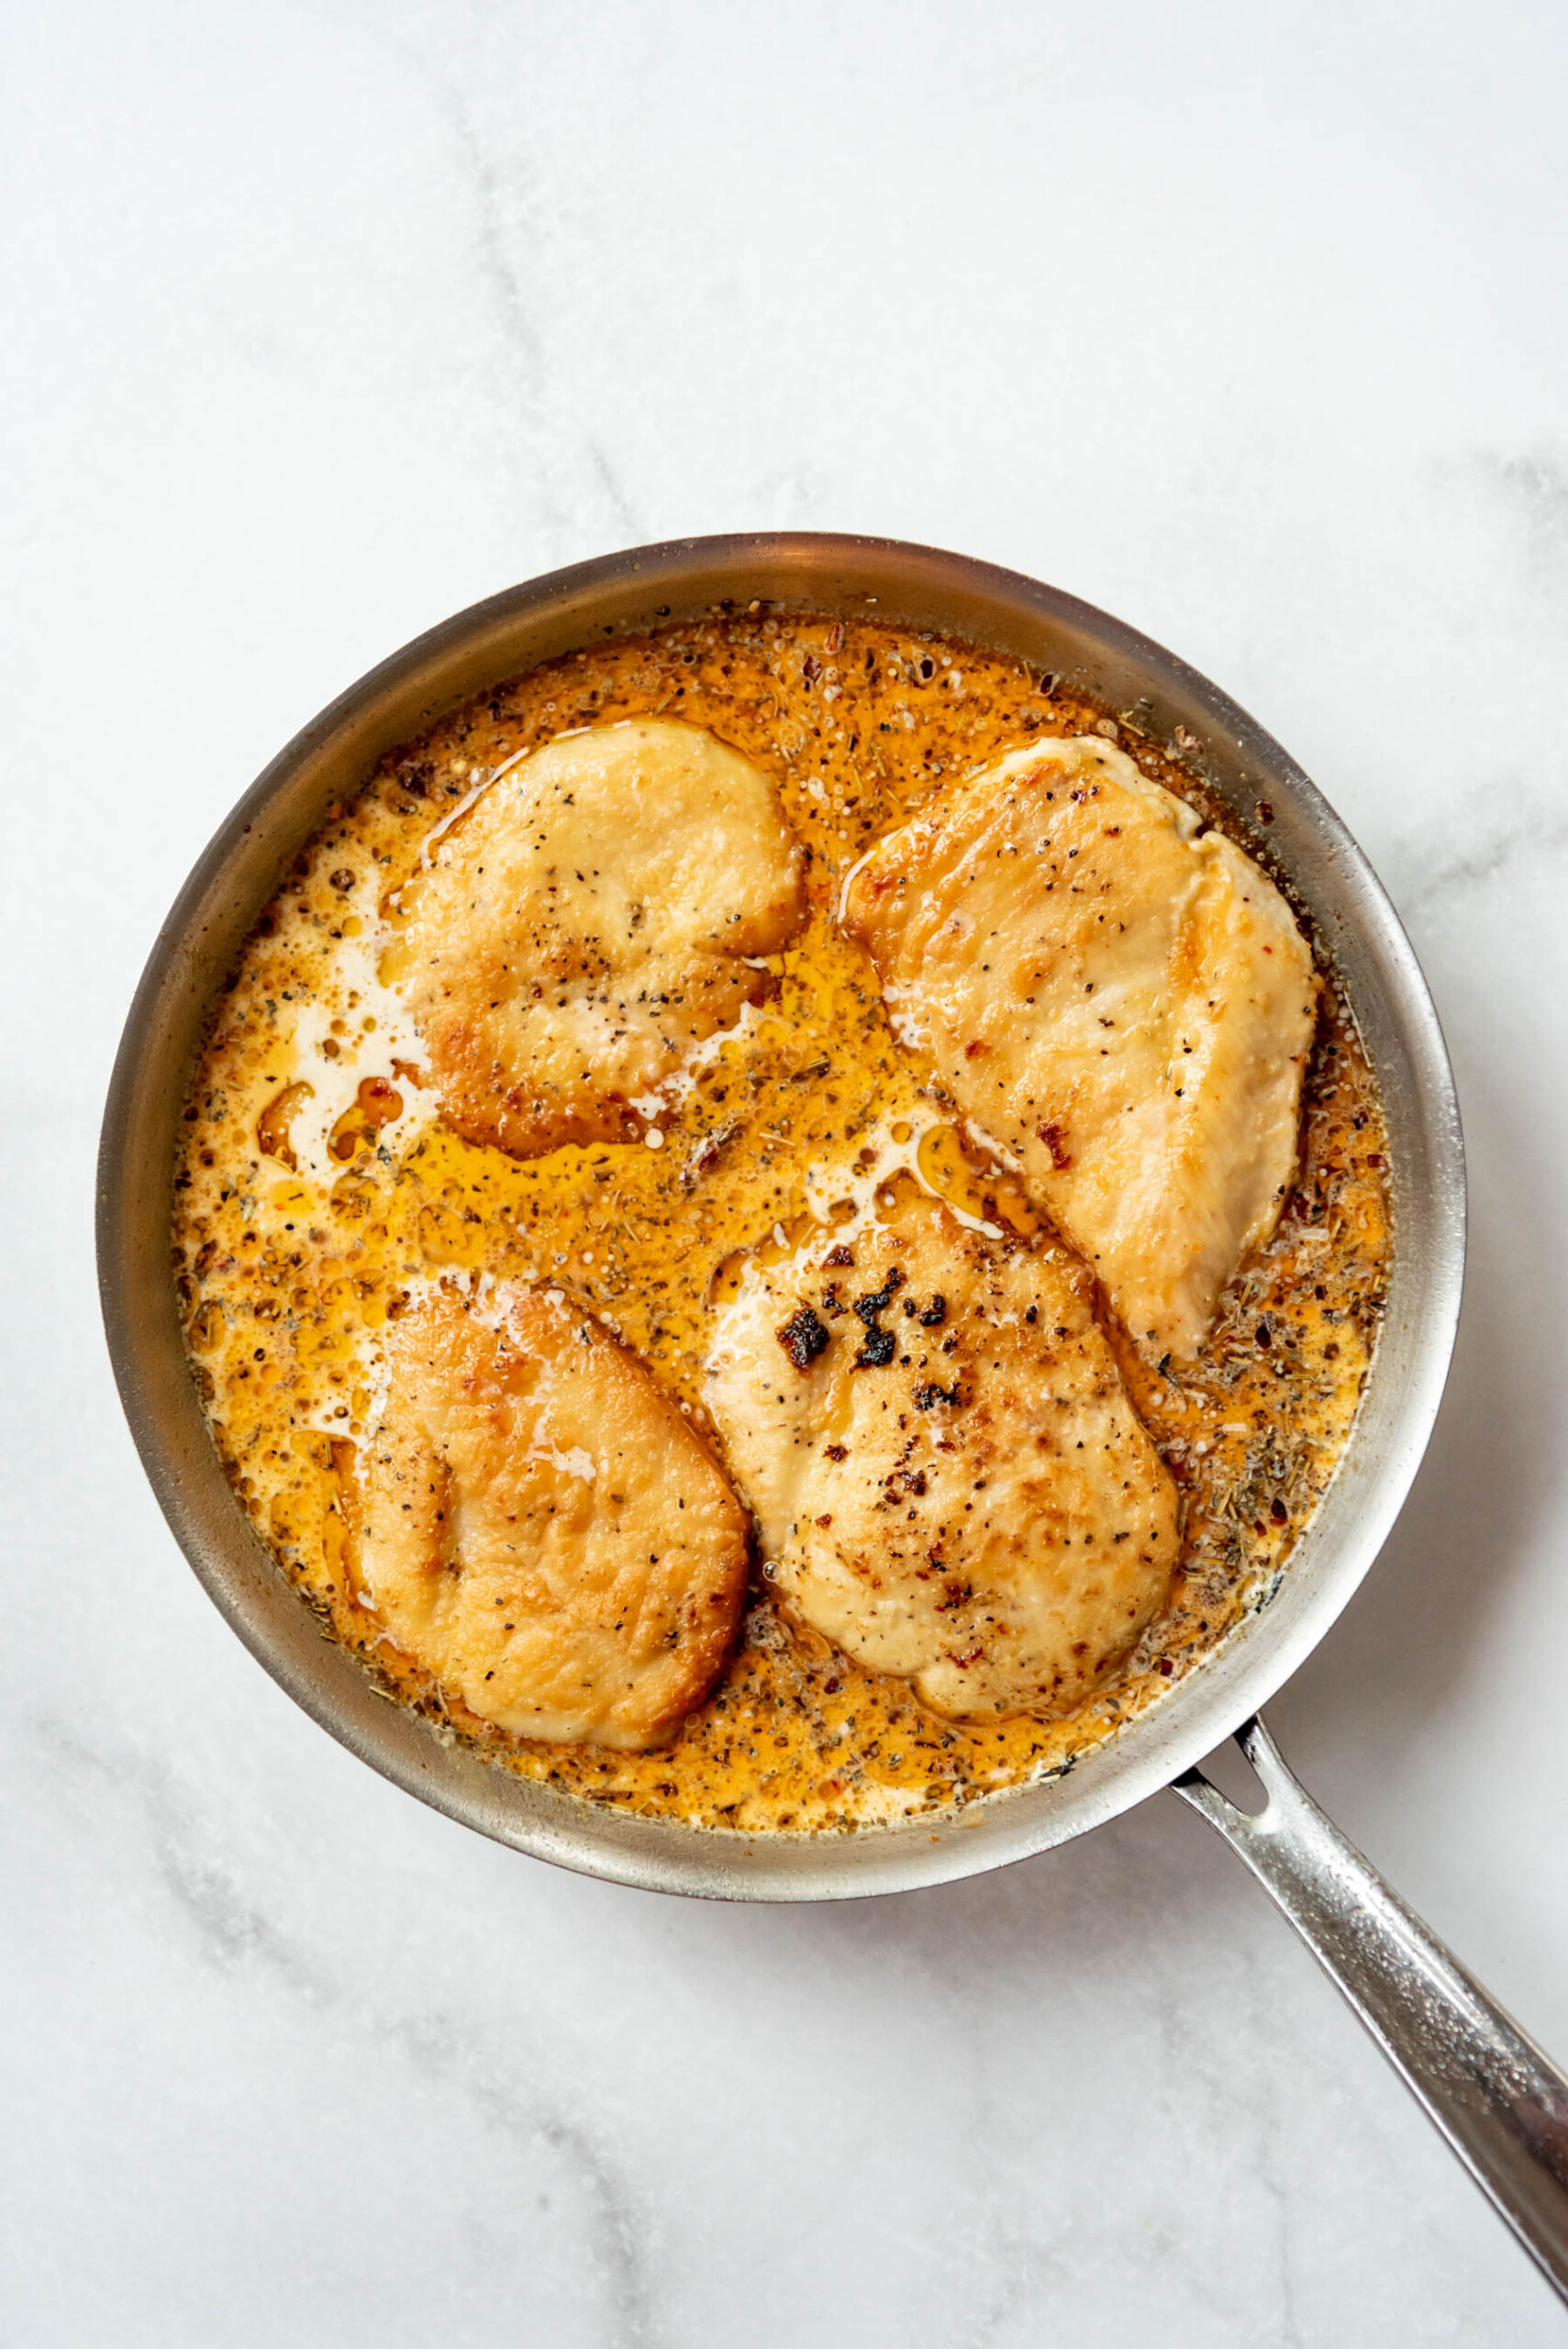 Returning seared chicken breasts to a pan with a creamy sundried tomato sauce.